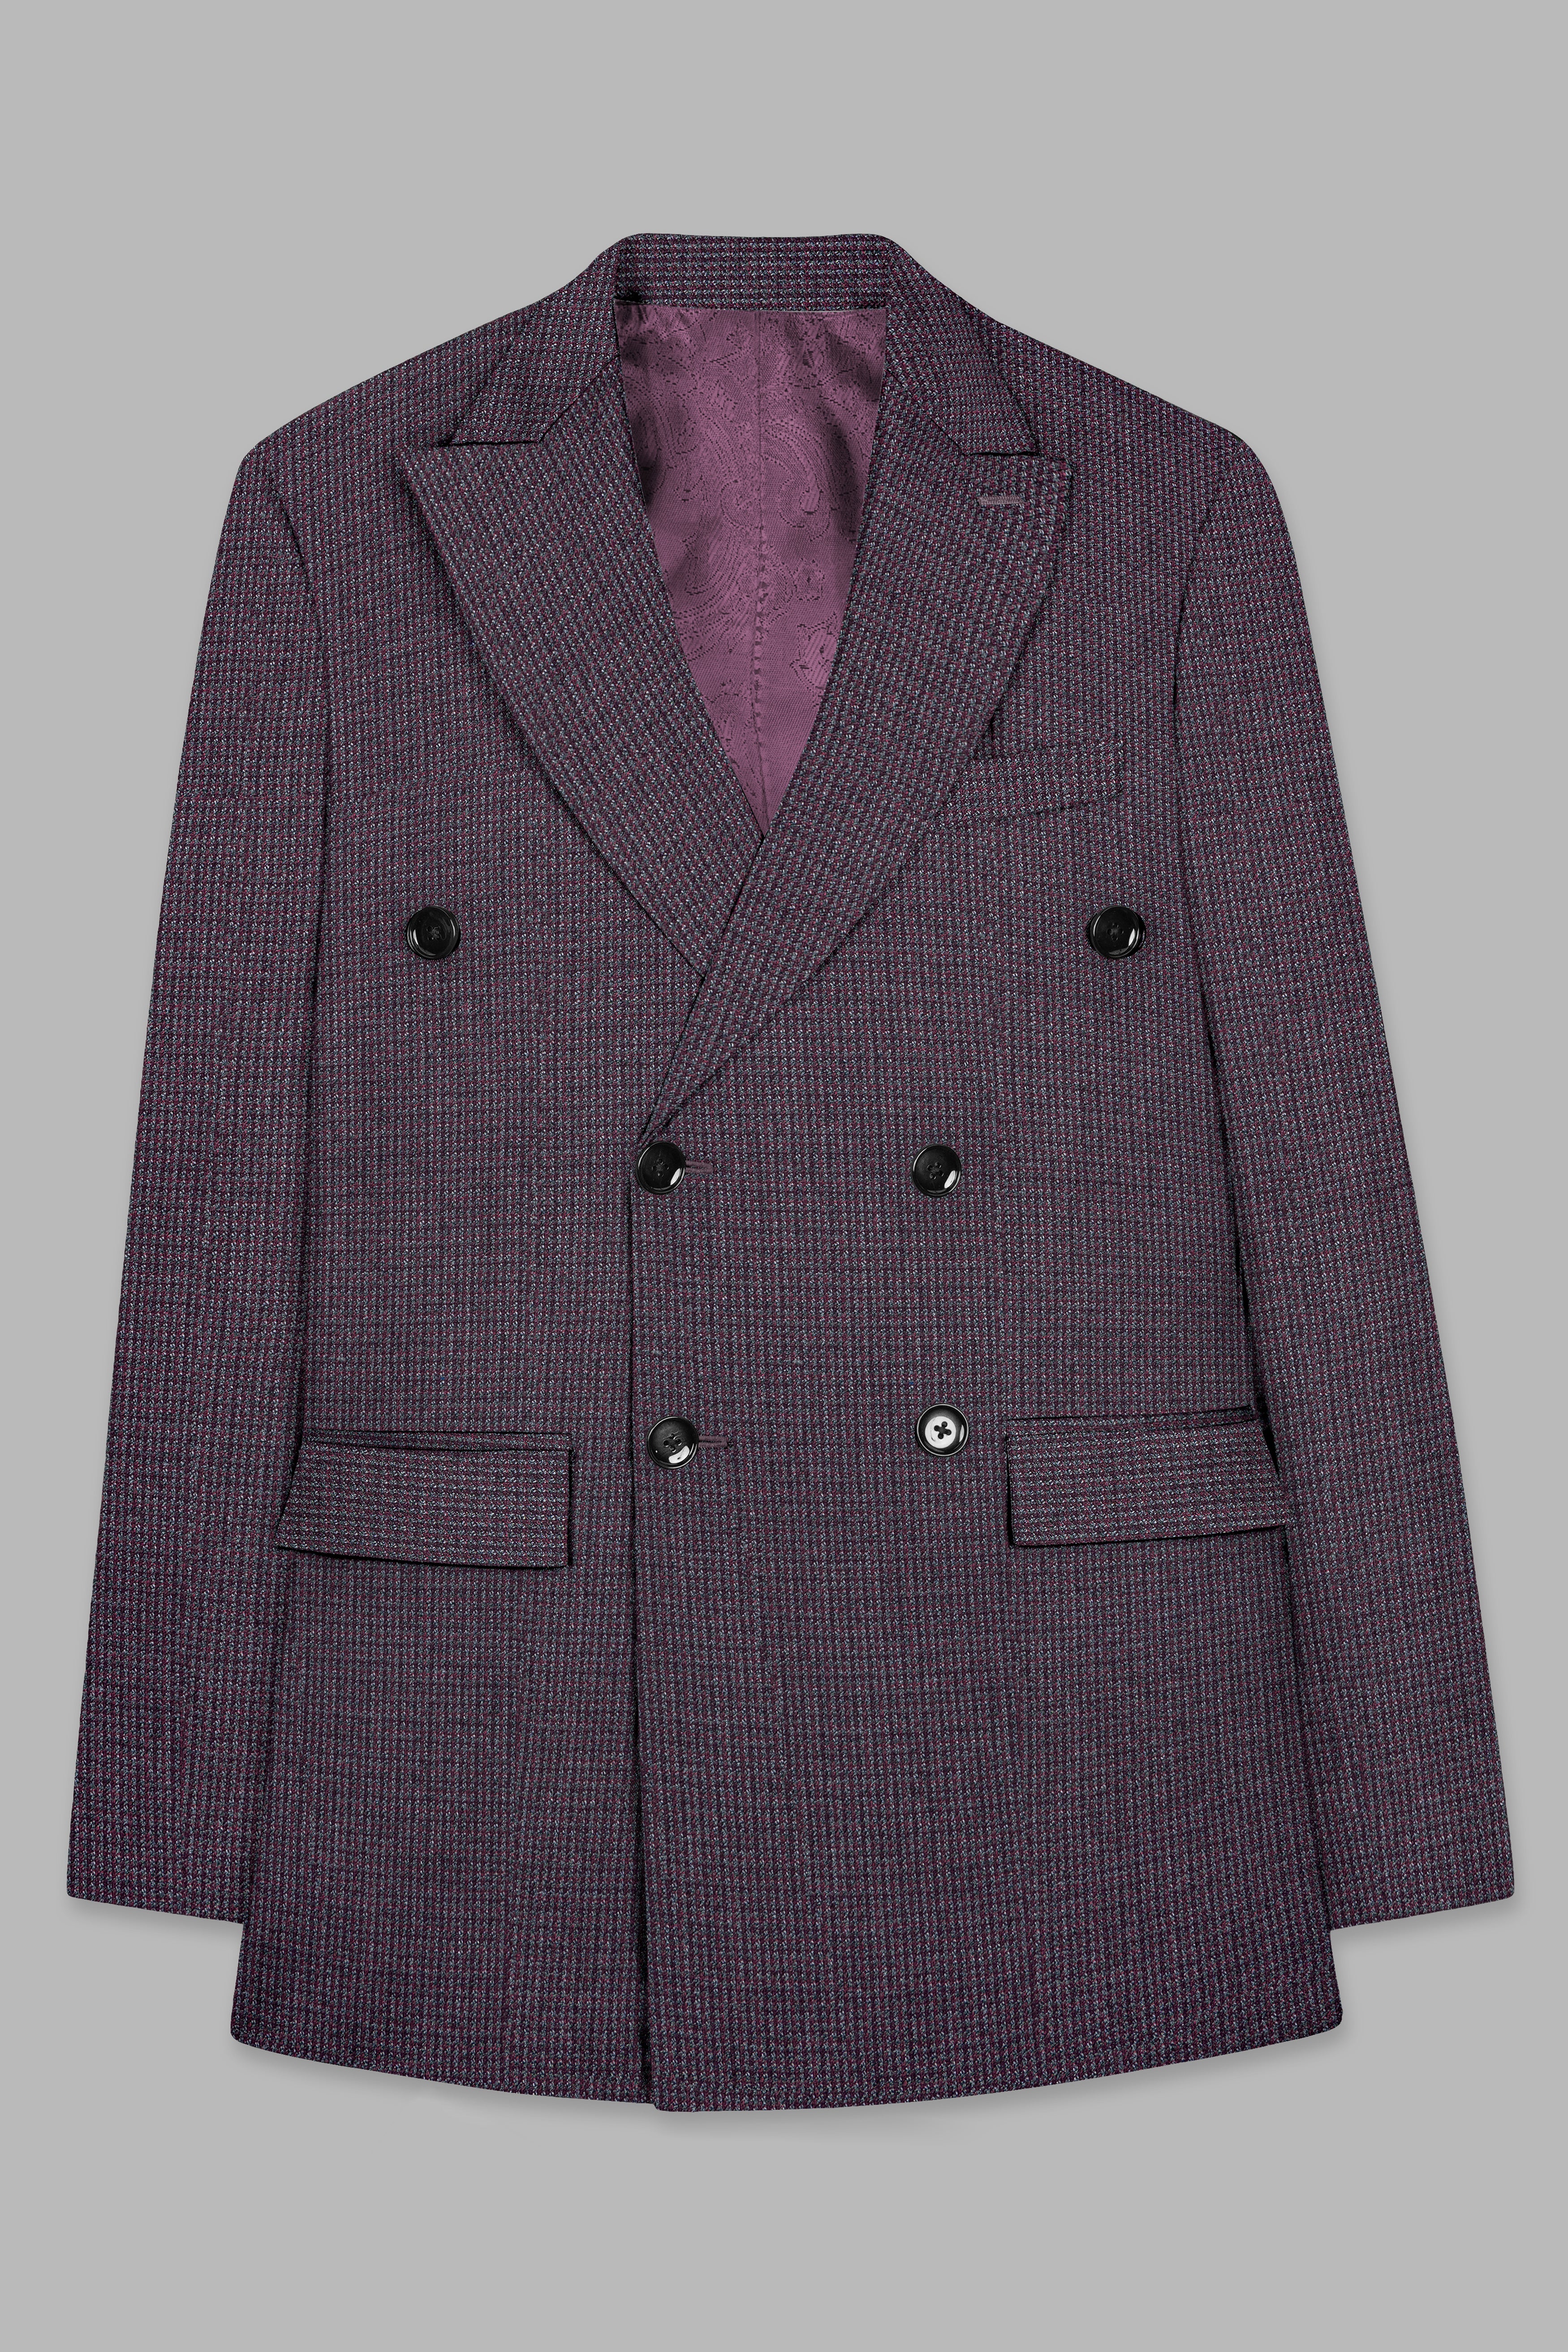 Thunder Purple Textured Wool Rich Double Breasted Suit